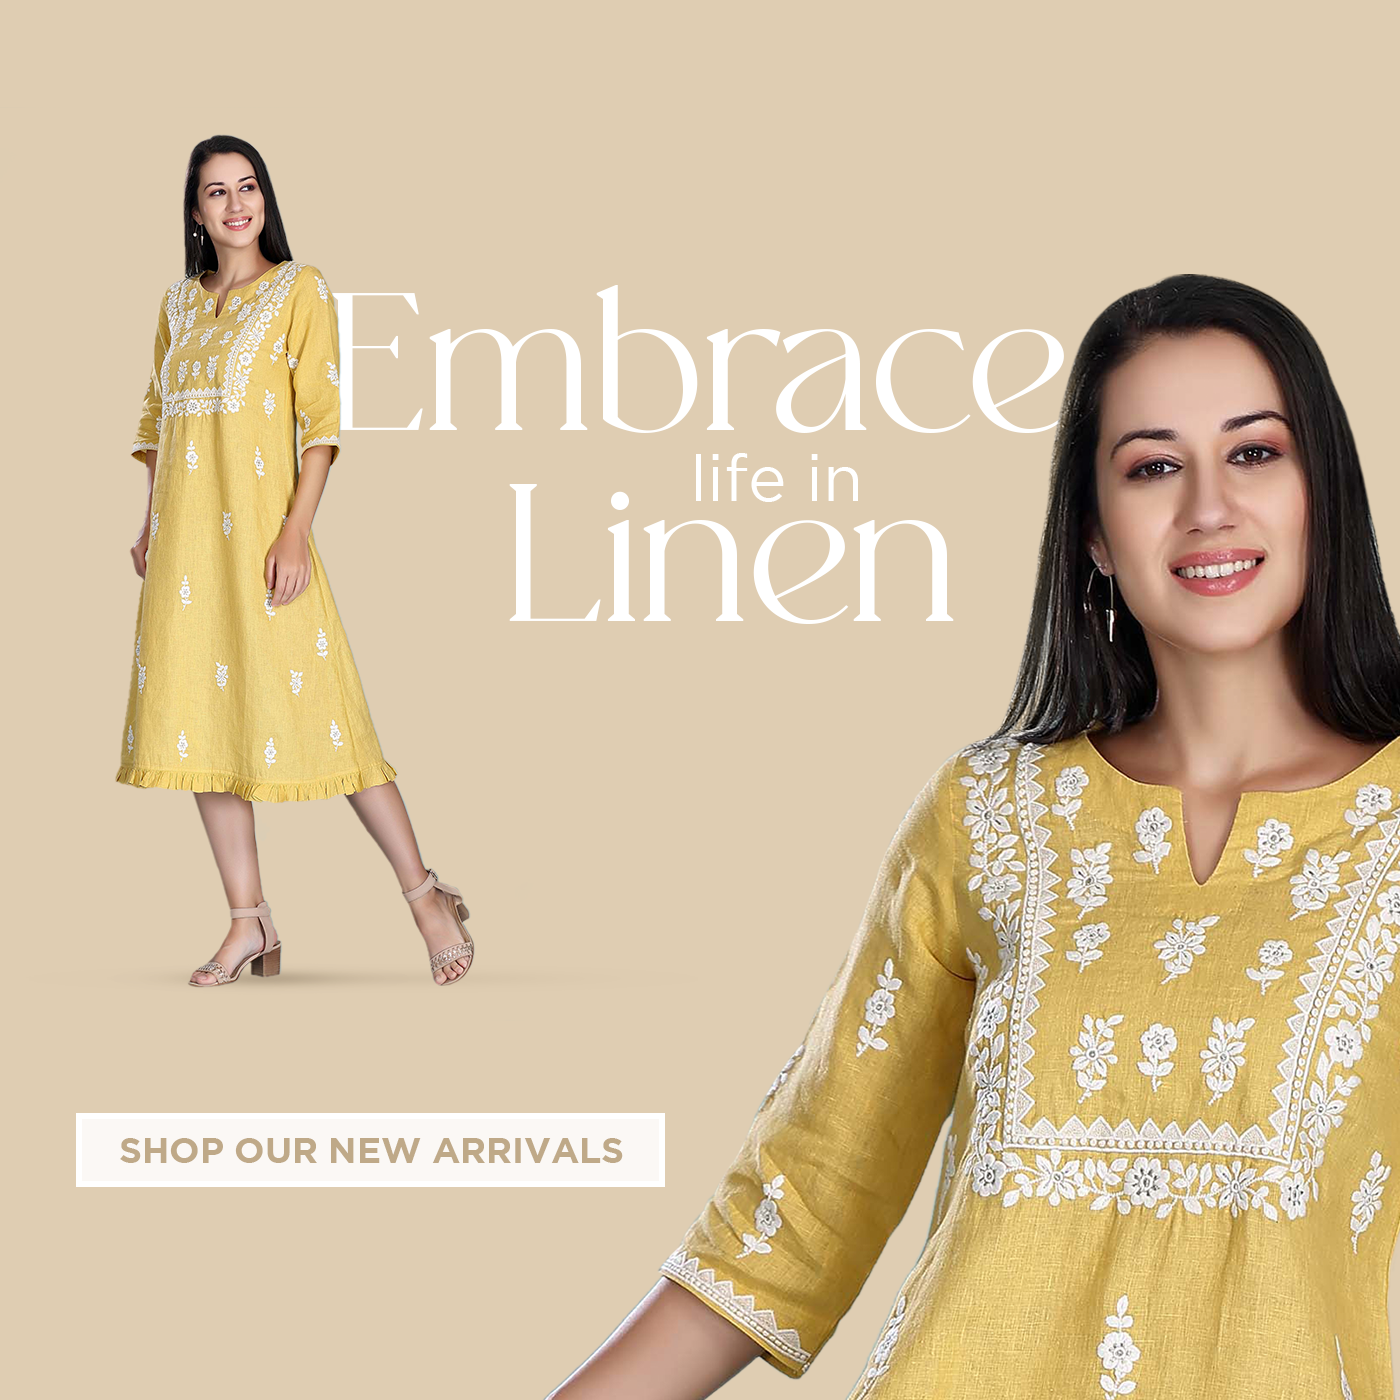 Linen and Linens, Linen Manufacturer in India – Linen and Linens